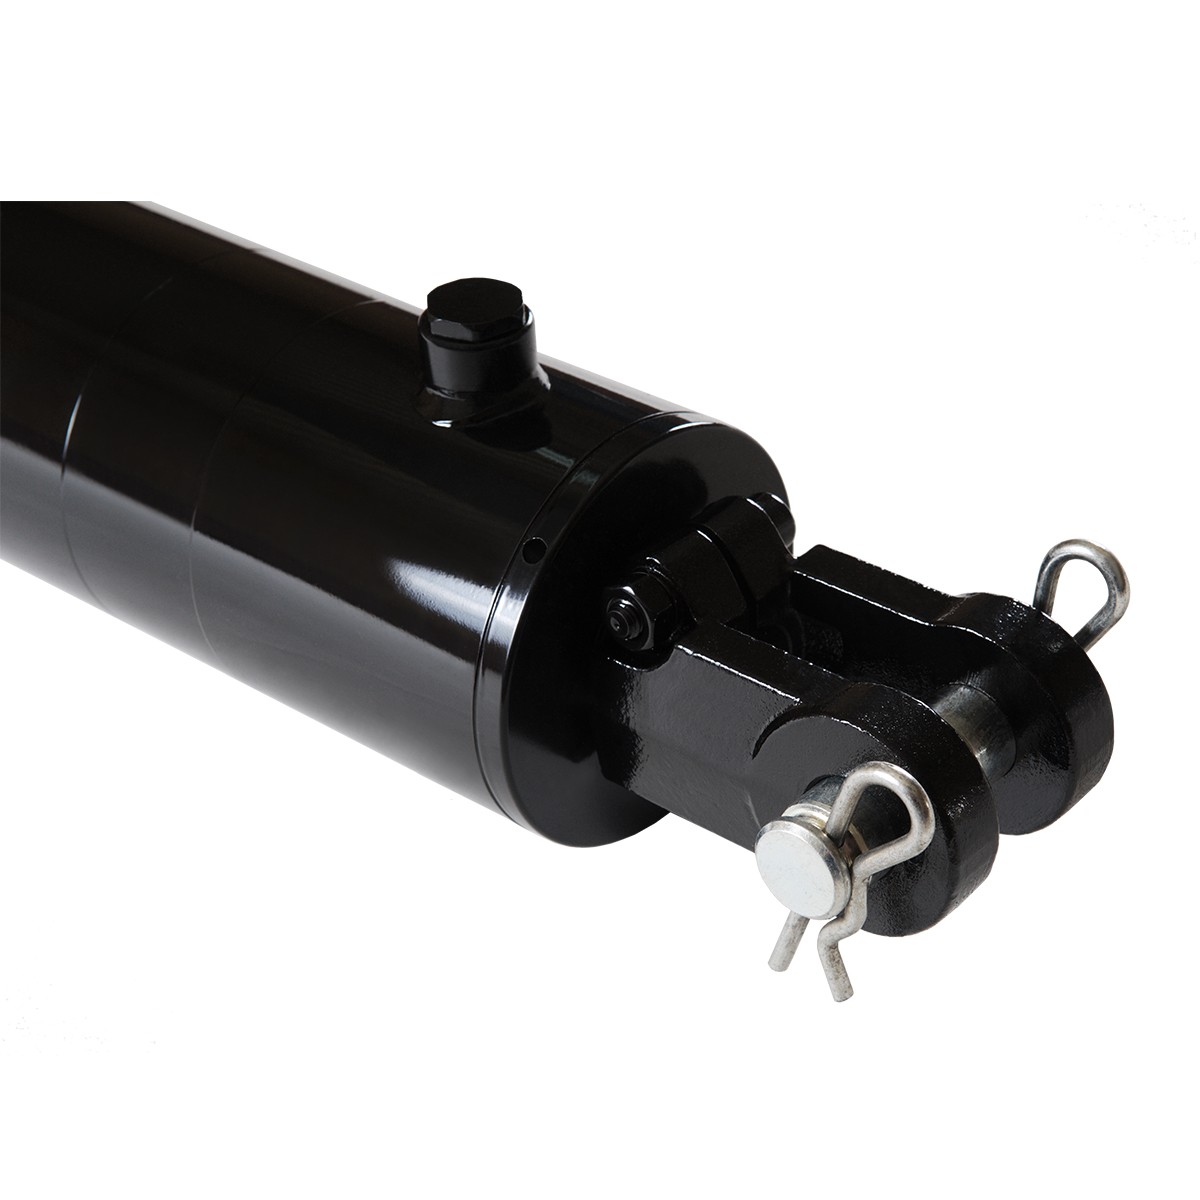 4" bore x 8" ASAE stroke clevis hydraulic cylinder